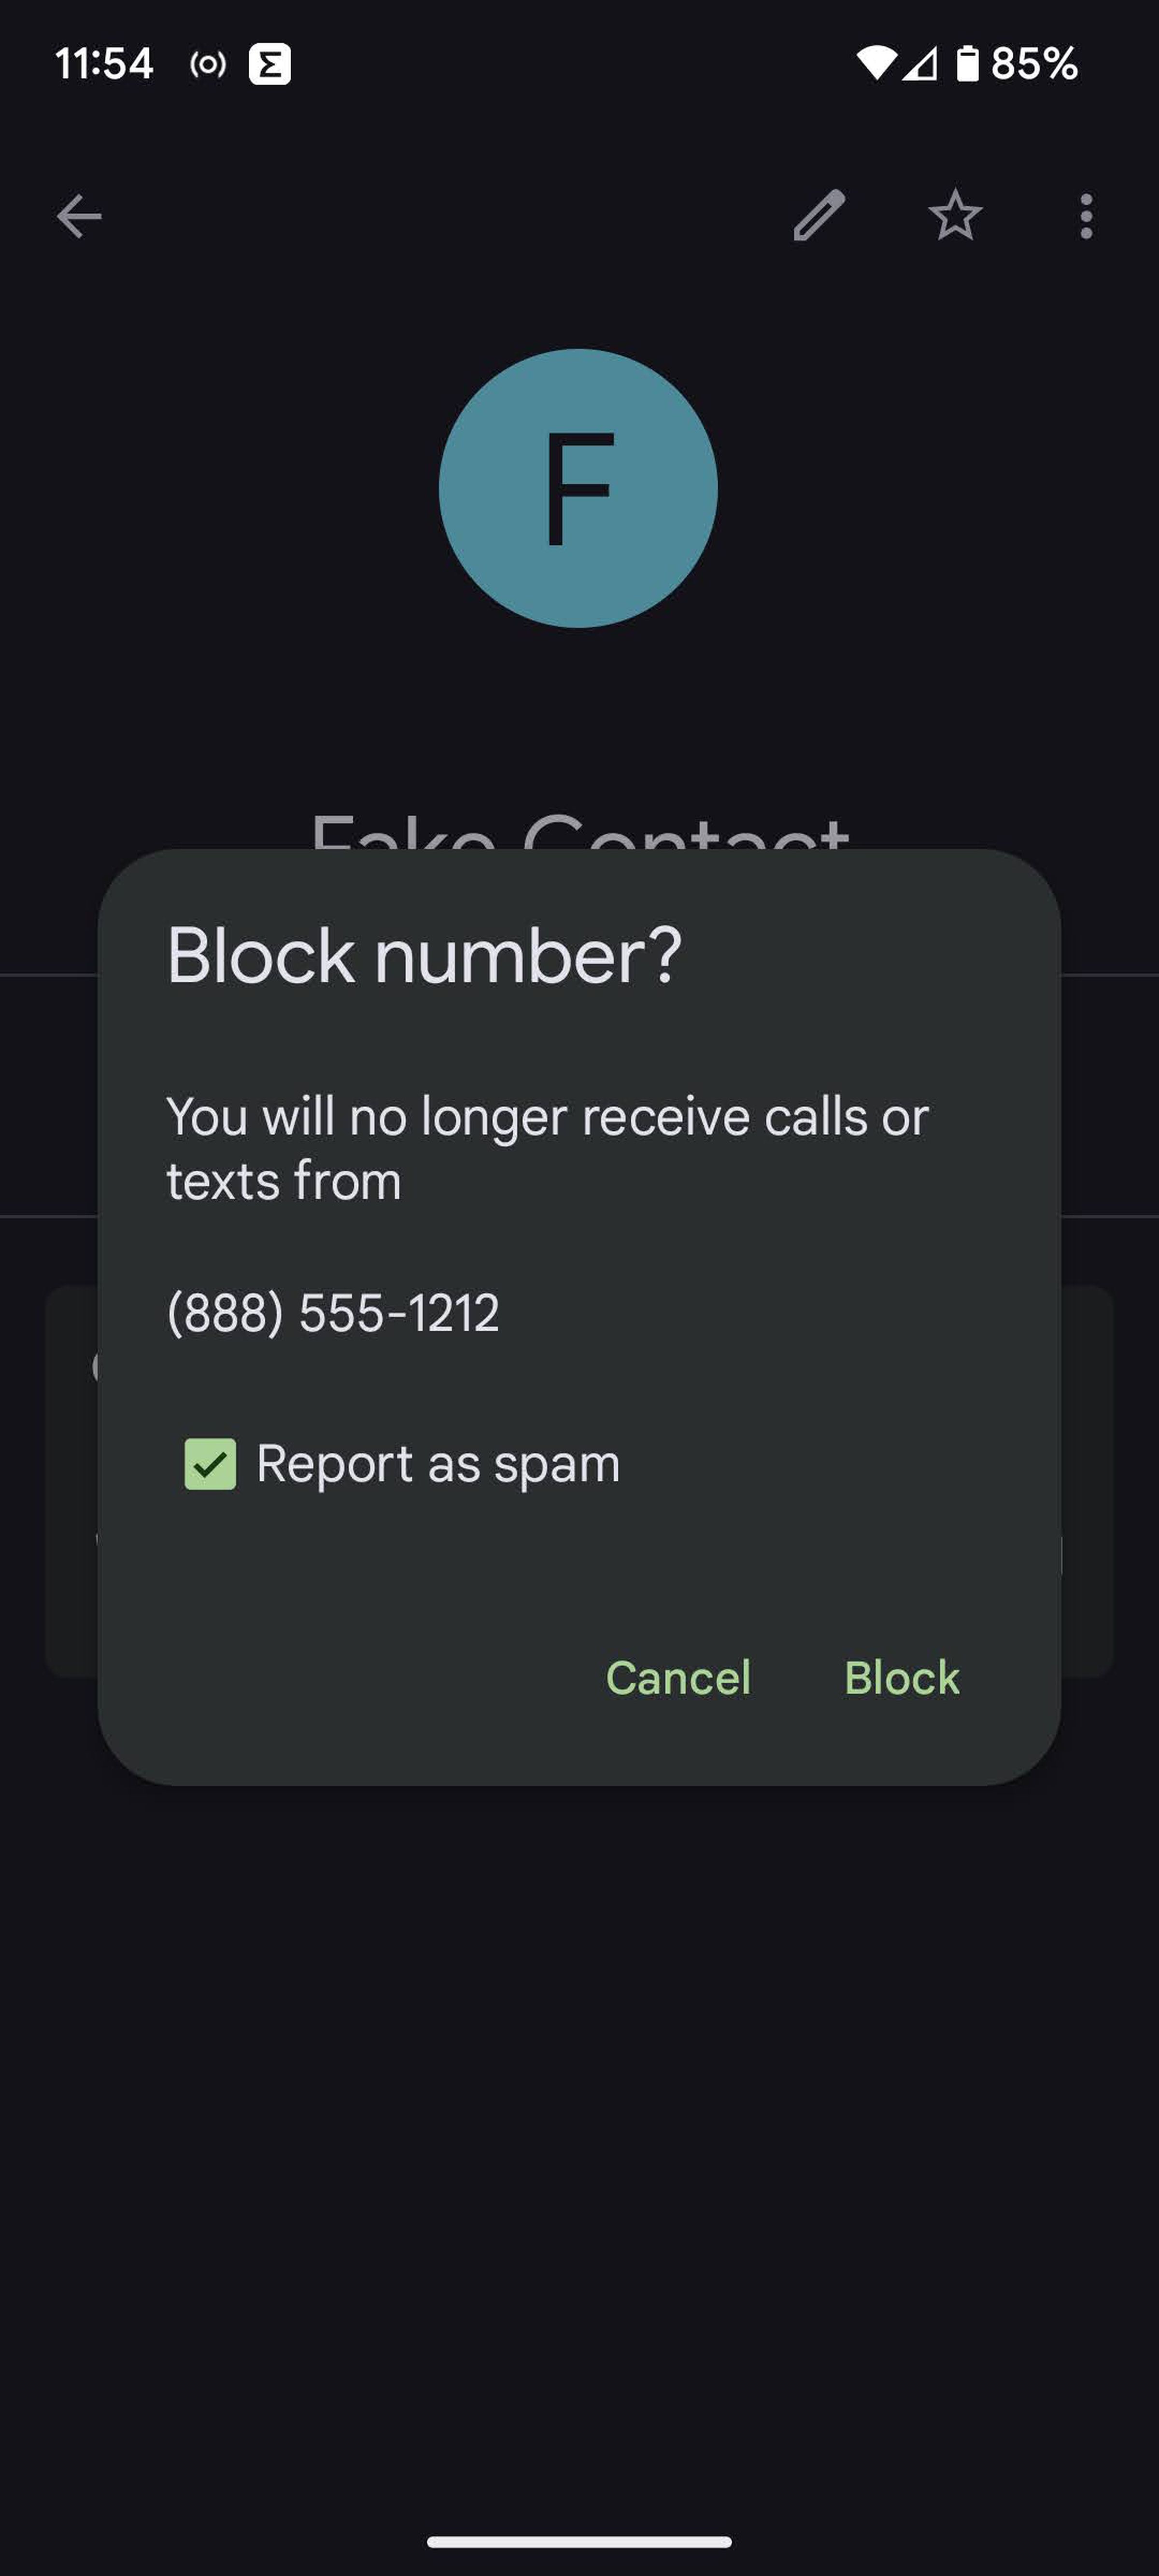 On a mobile page, a popup window asked if you want to block a number, and lets you check a box that will report it as spam.